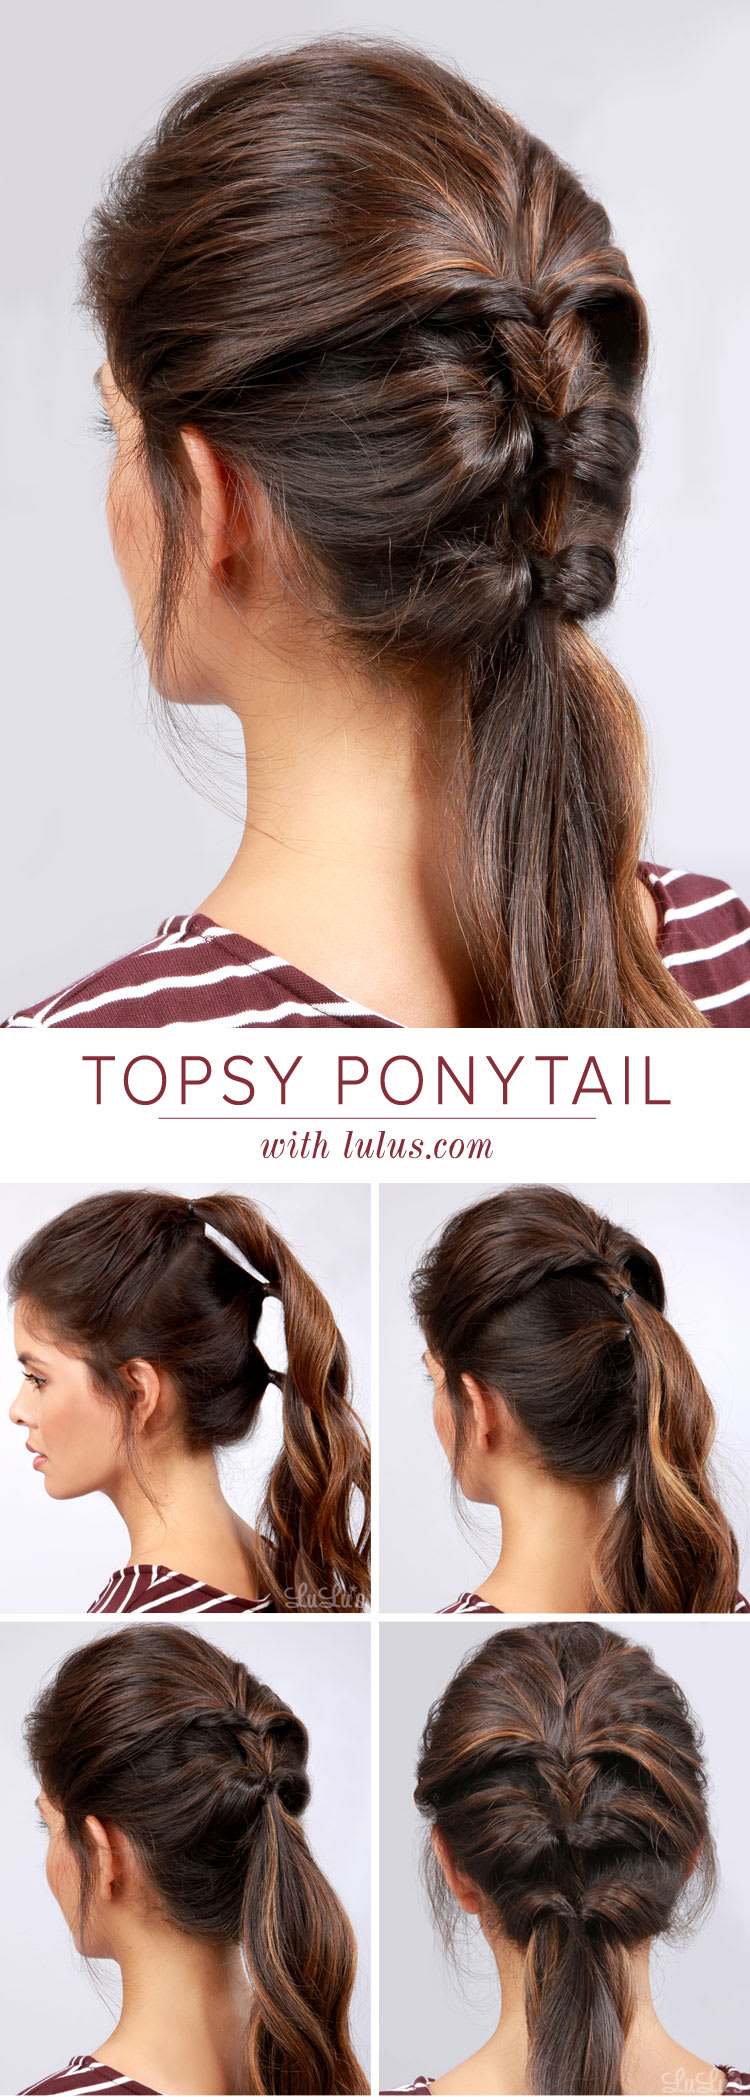 Lulus How-To: Topsy Ponytail Hair Tutorial  Fashion Blog